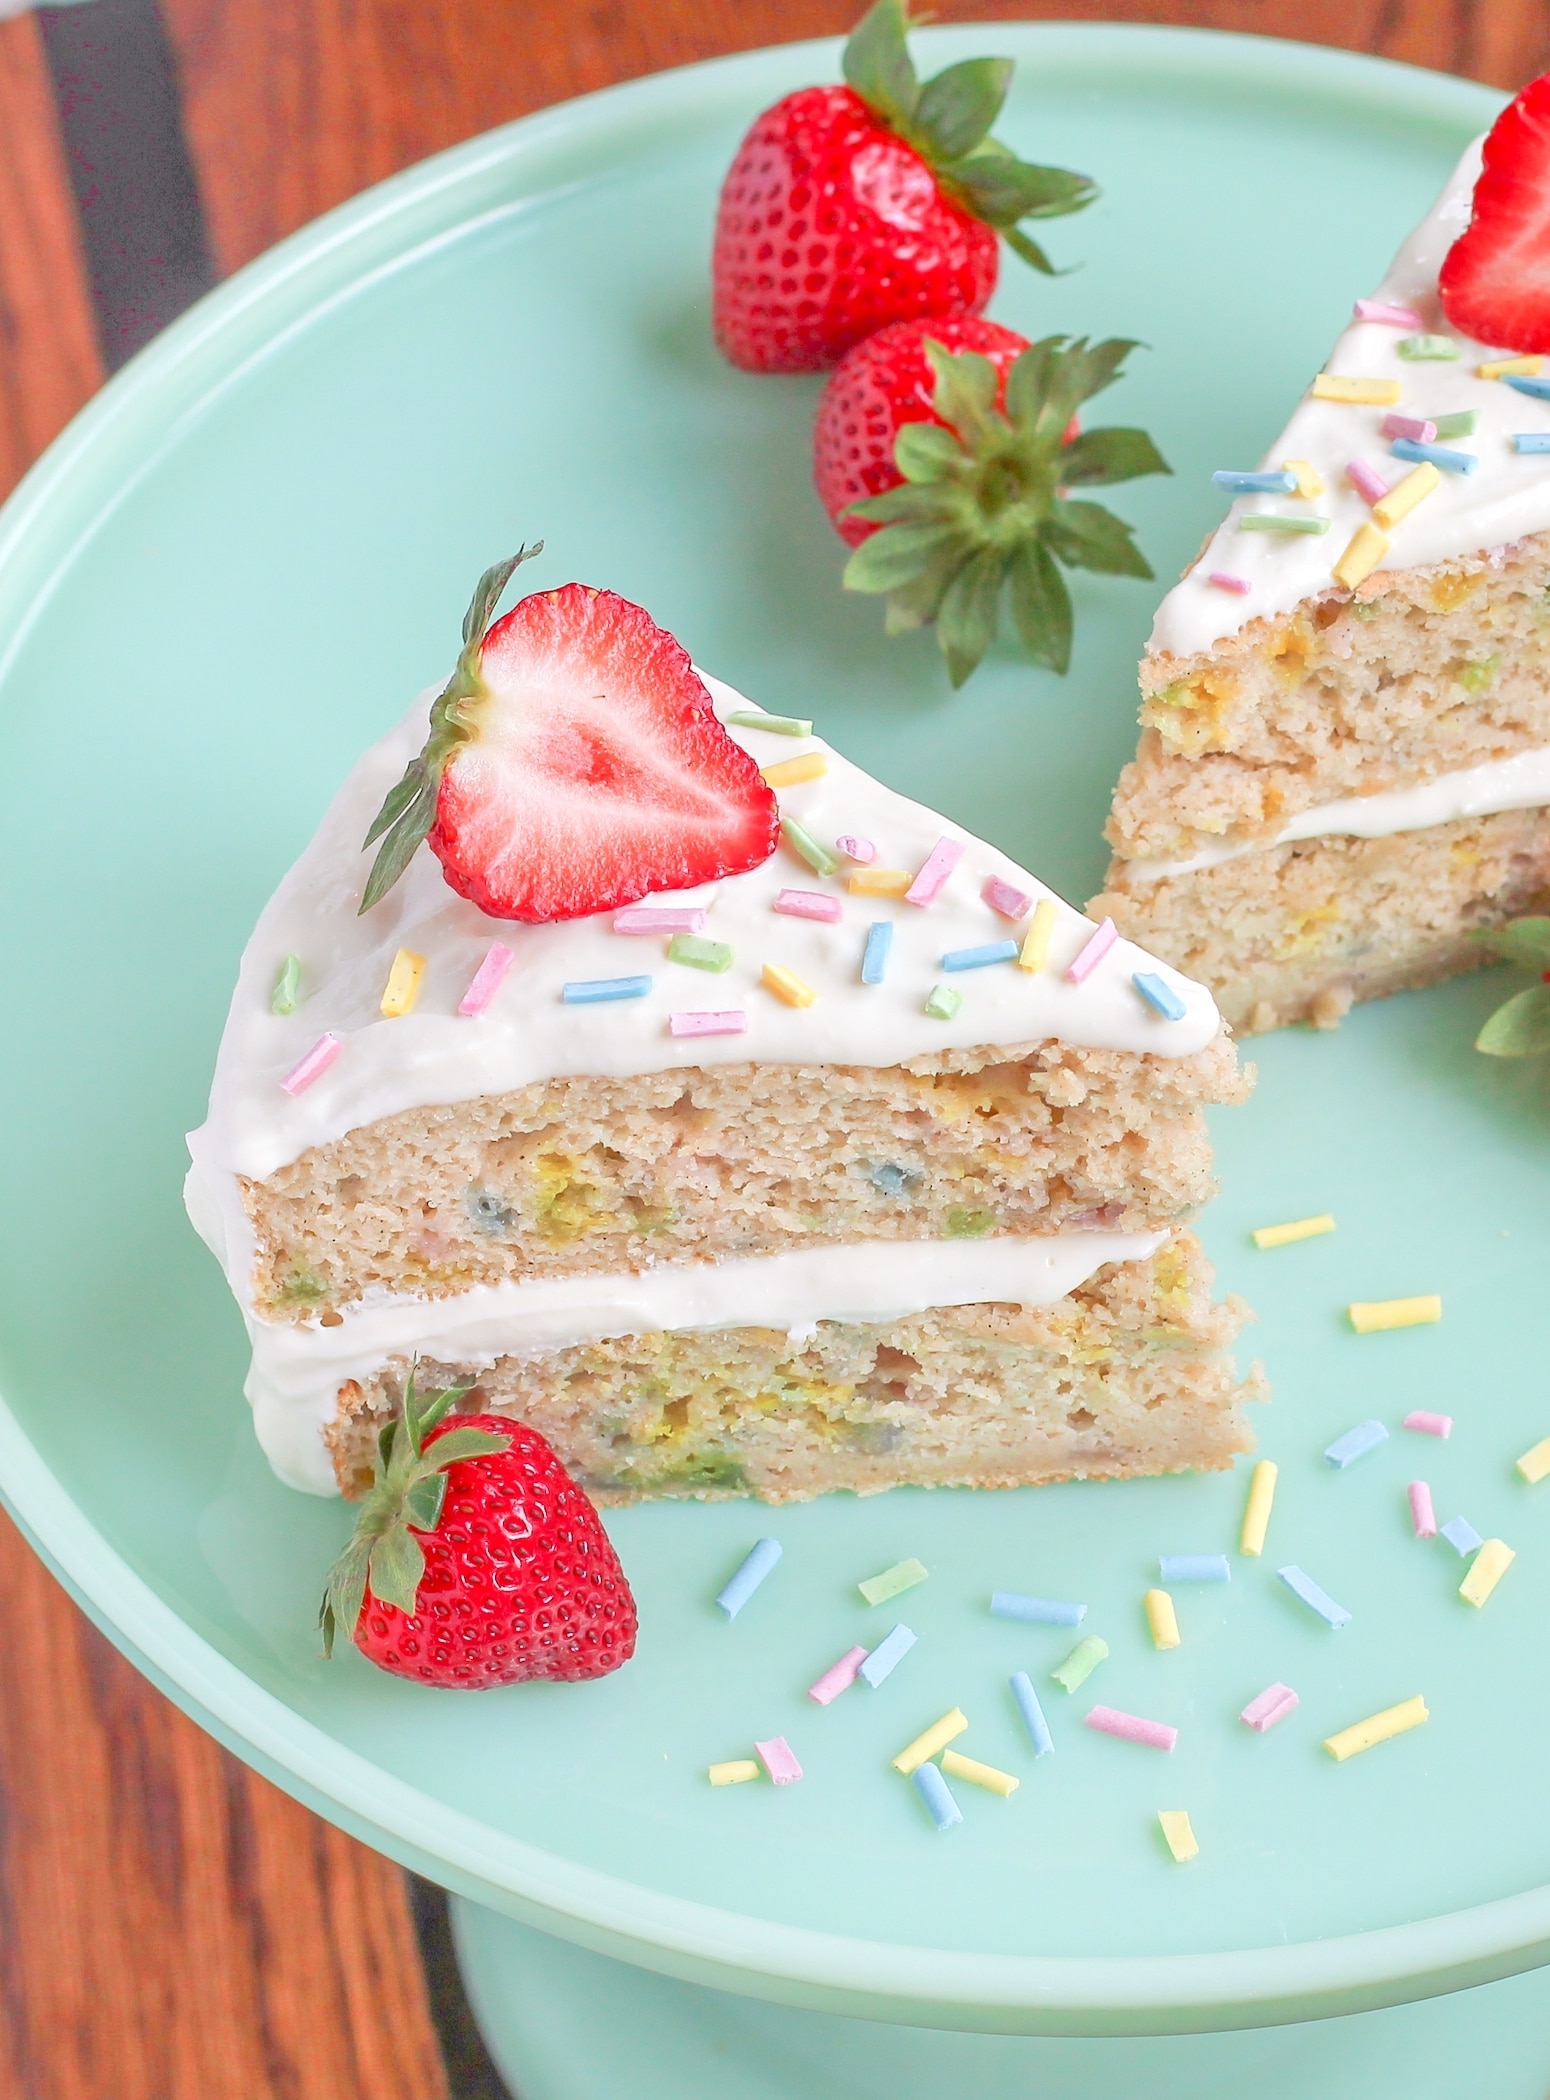 The BEST Gluten Free Funfetti Cake (what I call, "Funfairy Cake") - Desserts With Benefits